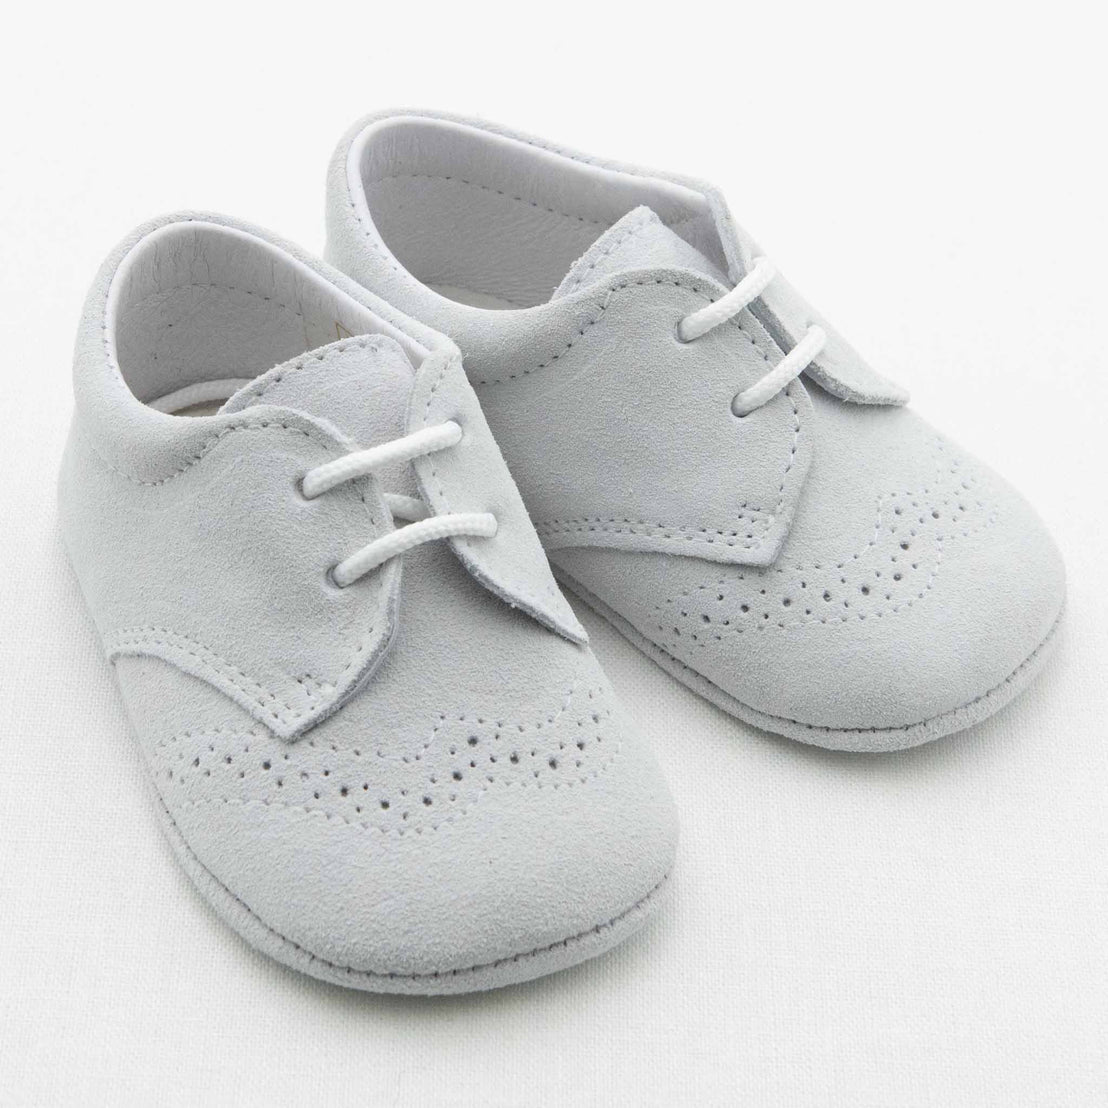 A pair of Dove Grey Suede Shoes for baby boys crafted from soft suede material. Handmade in Spain, these shoes boast a classic design with decorative brogue perforations adorning the front and edges. They feature white laces and a low heel, showcased on a plain white background.